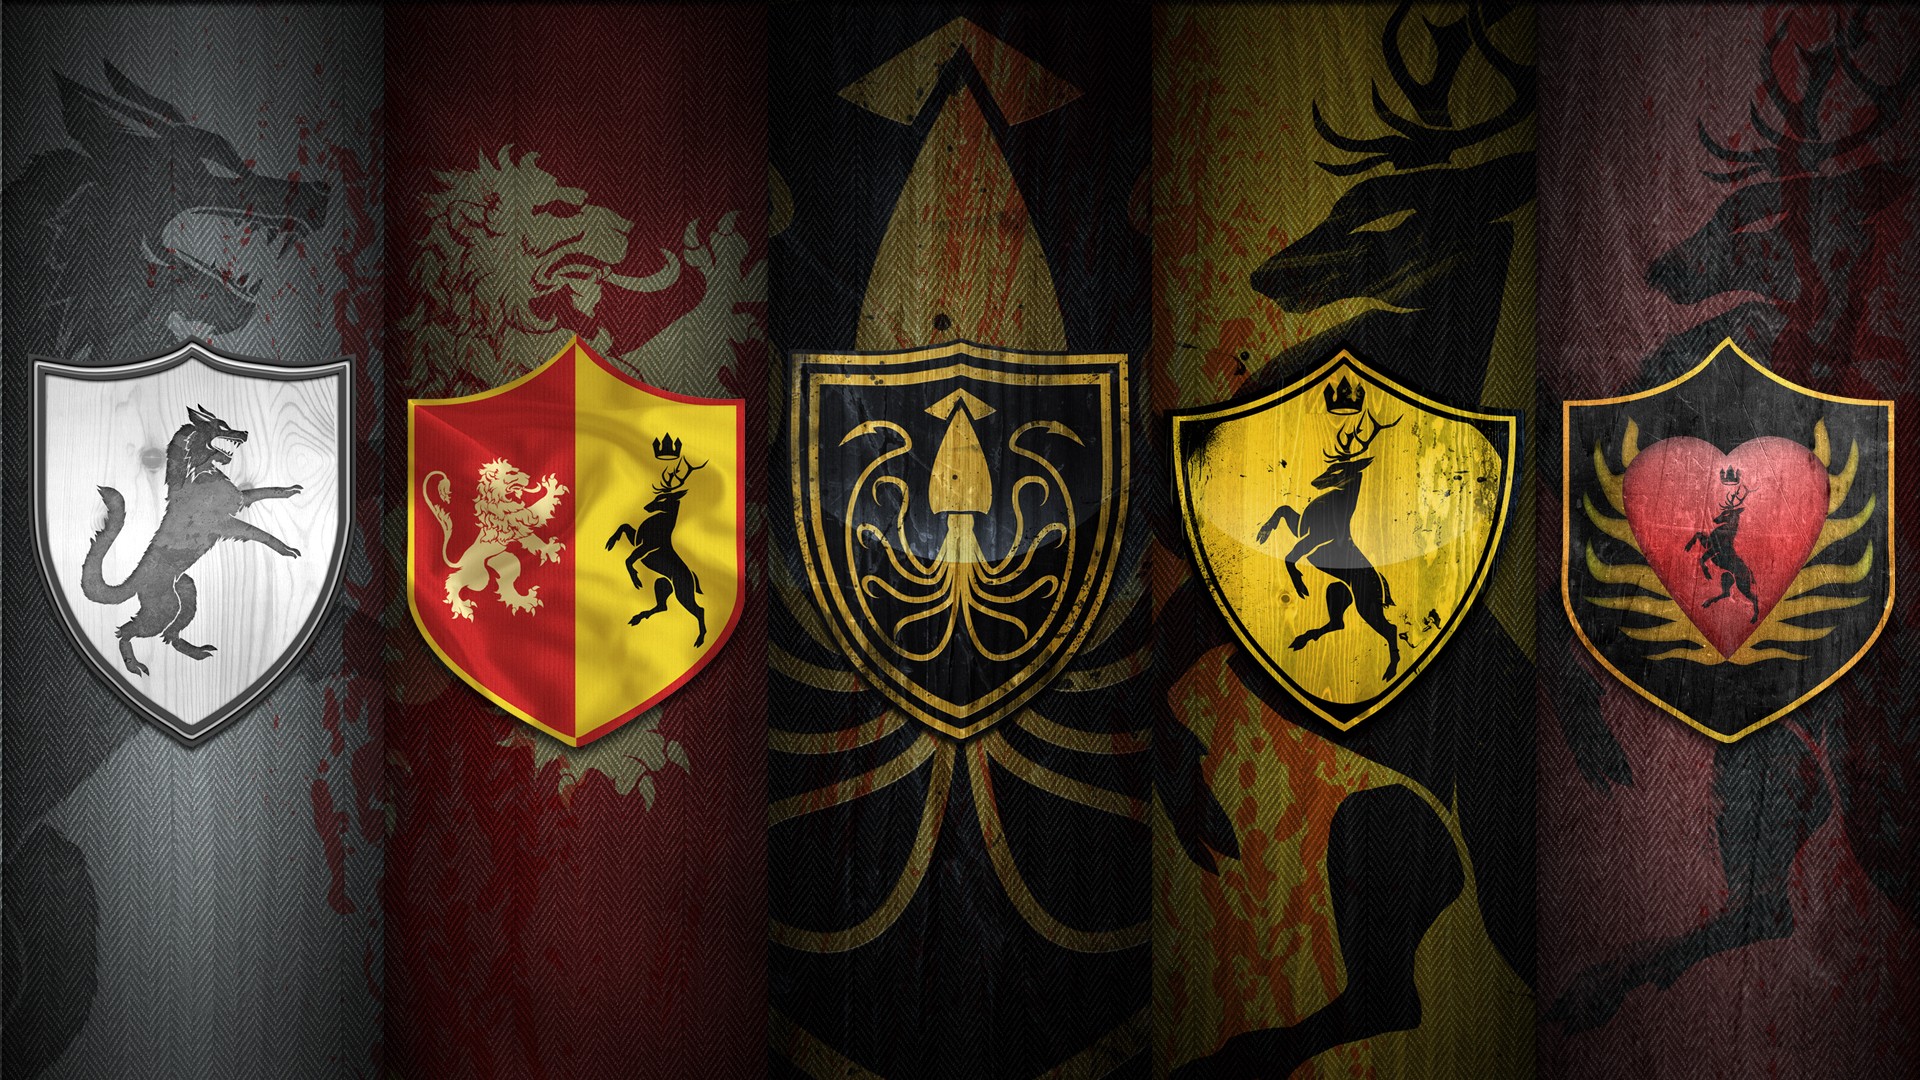 Wallpaper Game Of Thrones Image Mod Db